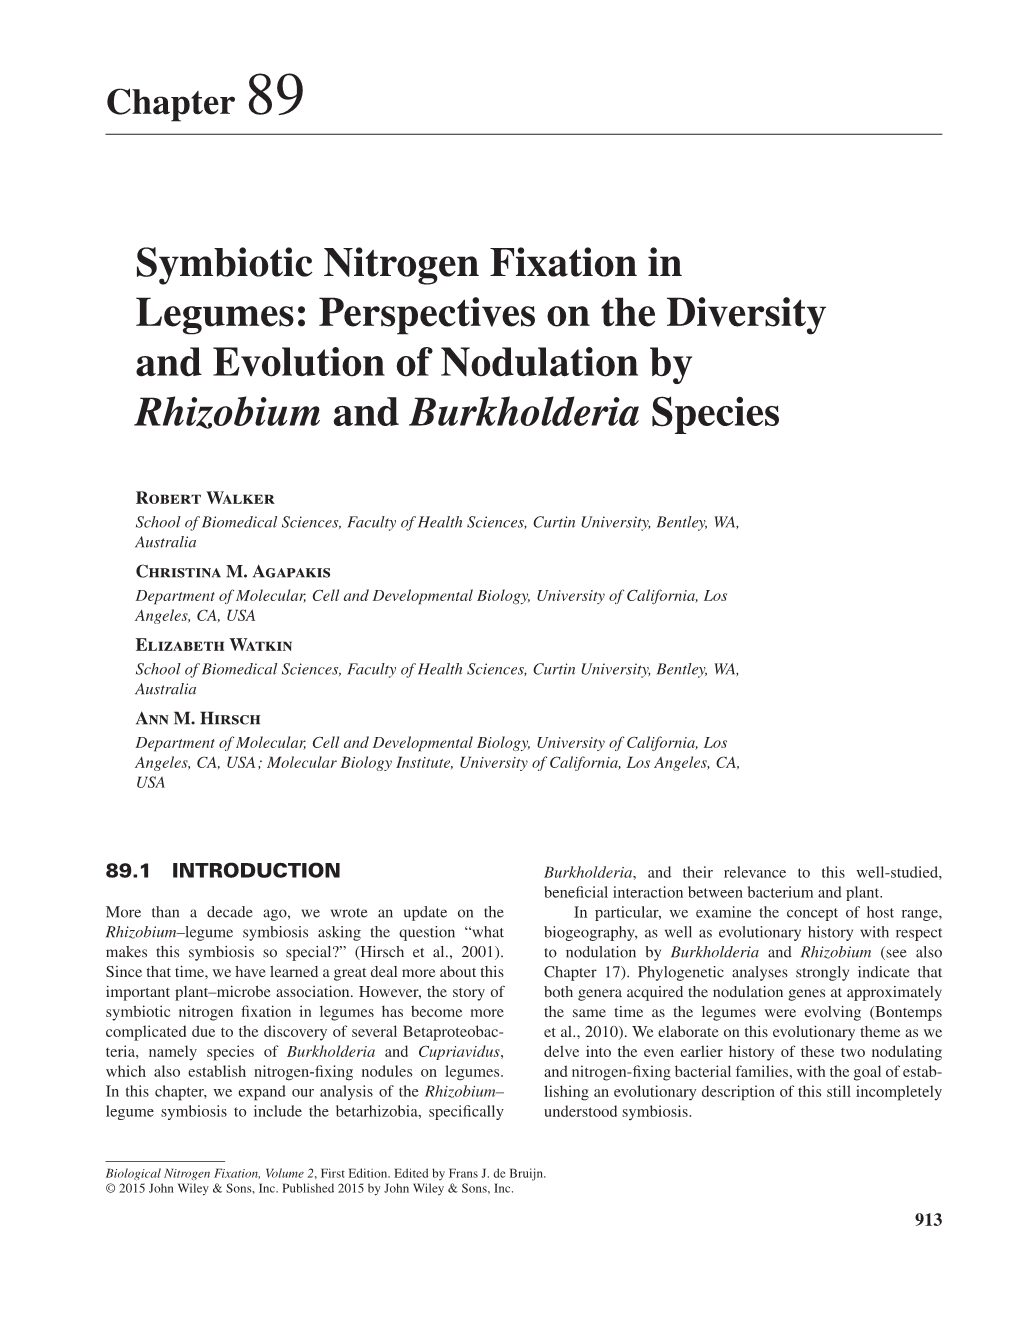 Symbiotic Nitrogen Fixation in Legumes: Perspectives on the Diversity and Evolution of Nodulation by Rhizobium and Burkholderia Species